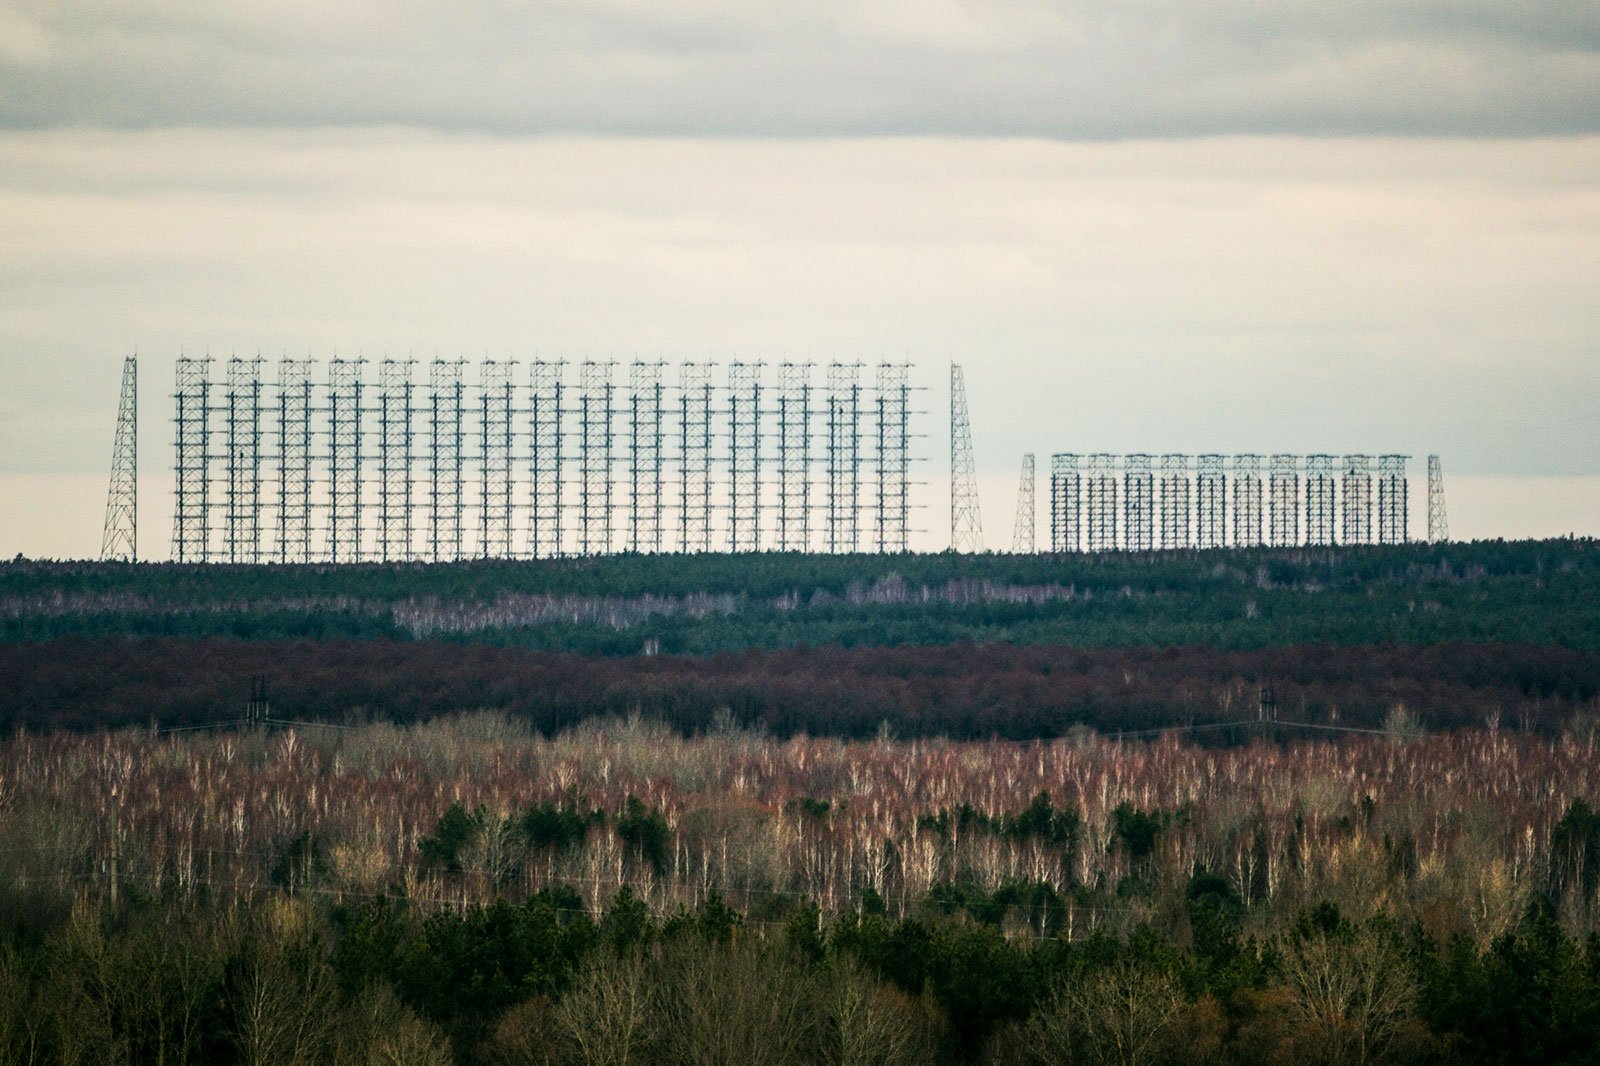 How to see the giant secret station Duga-radar in Chernobyl